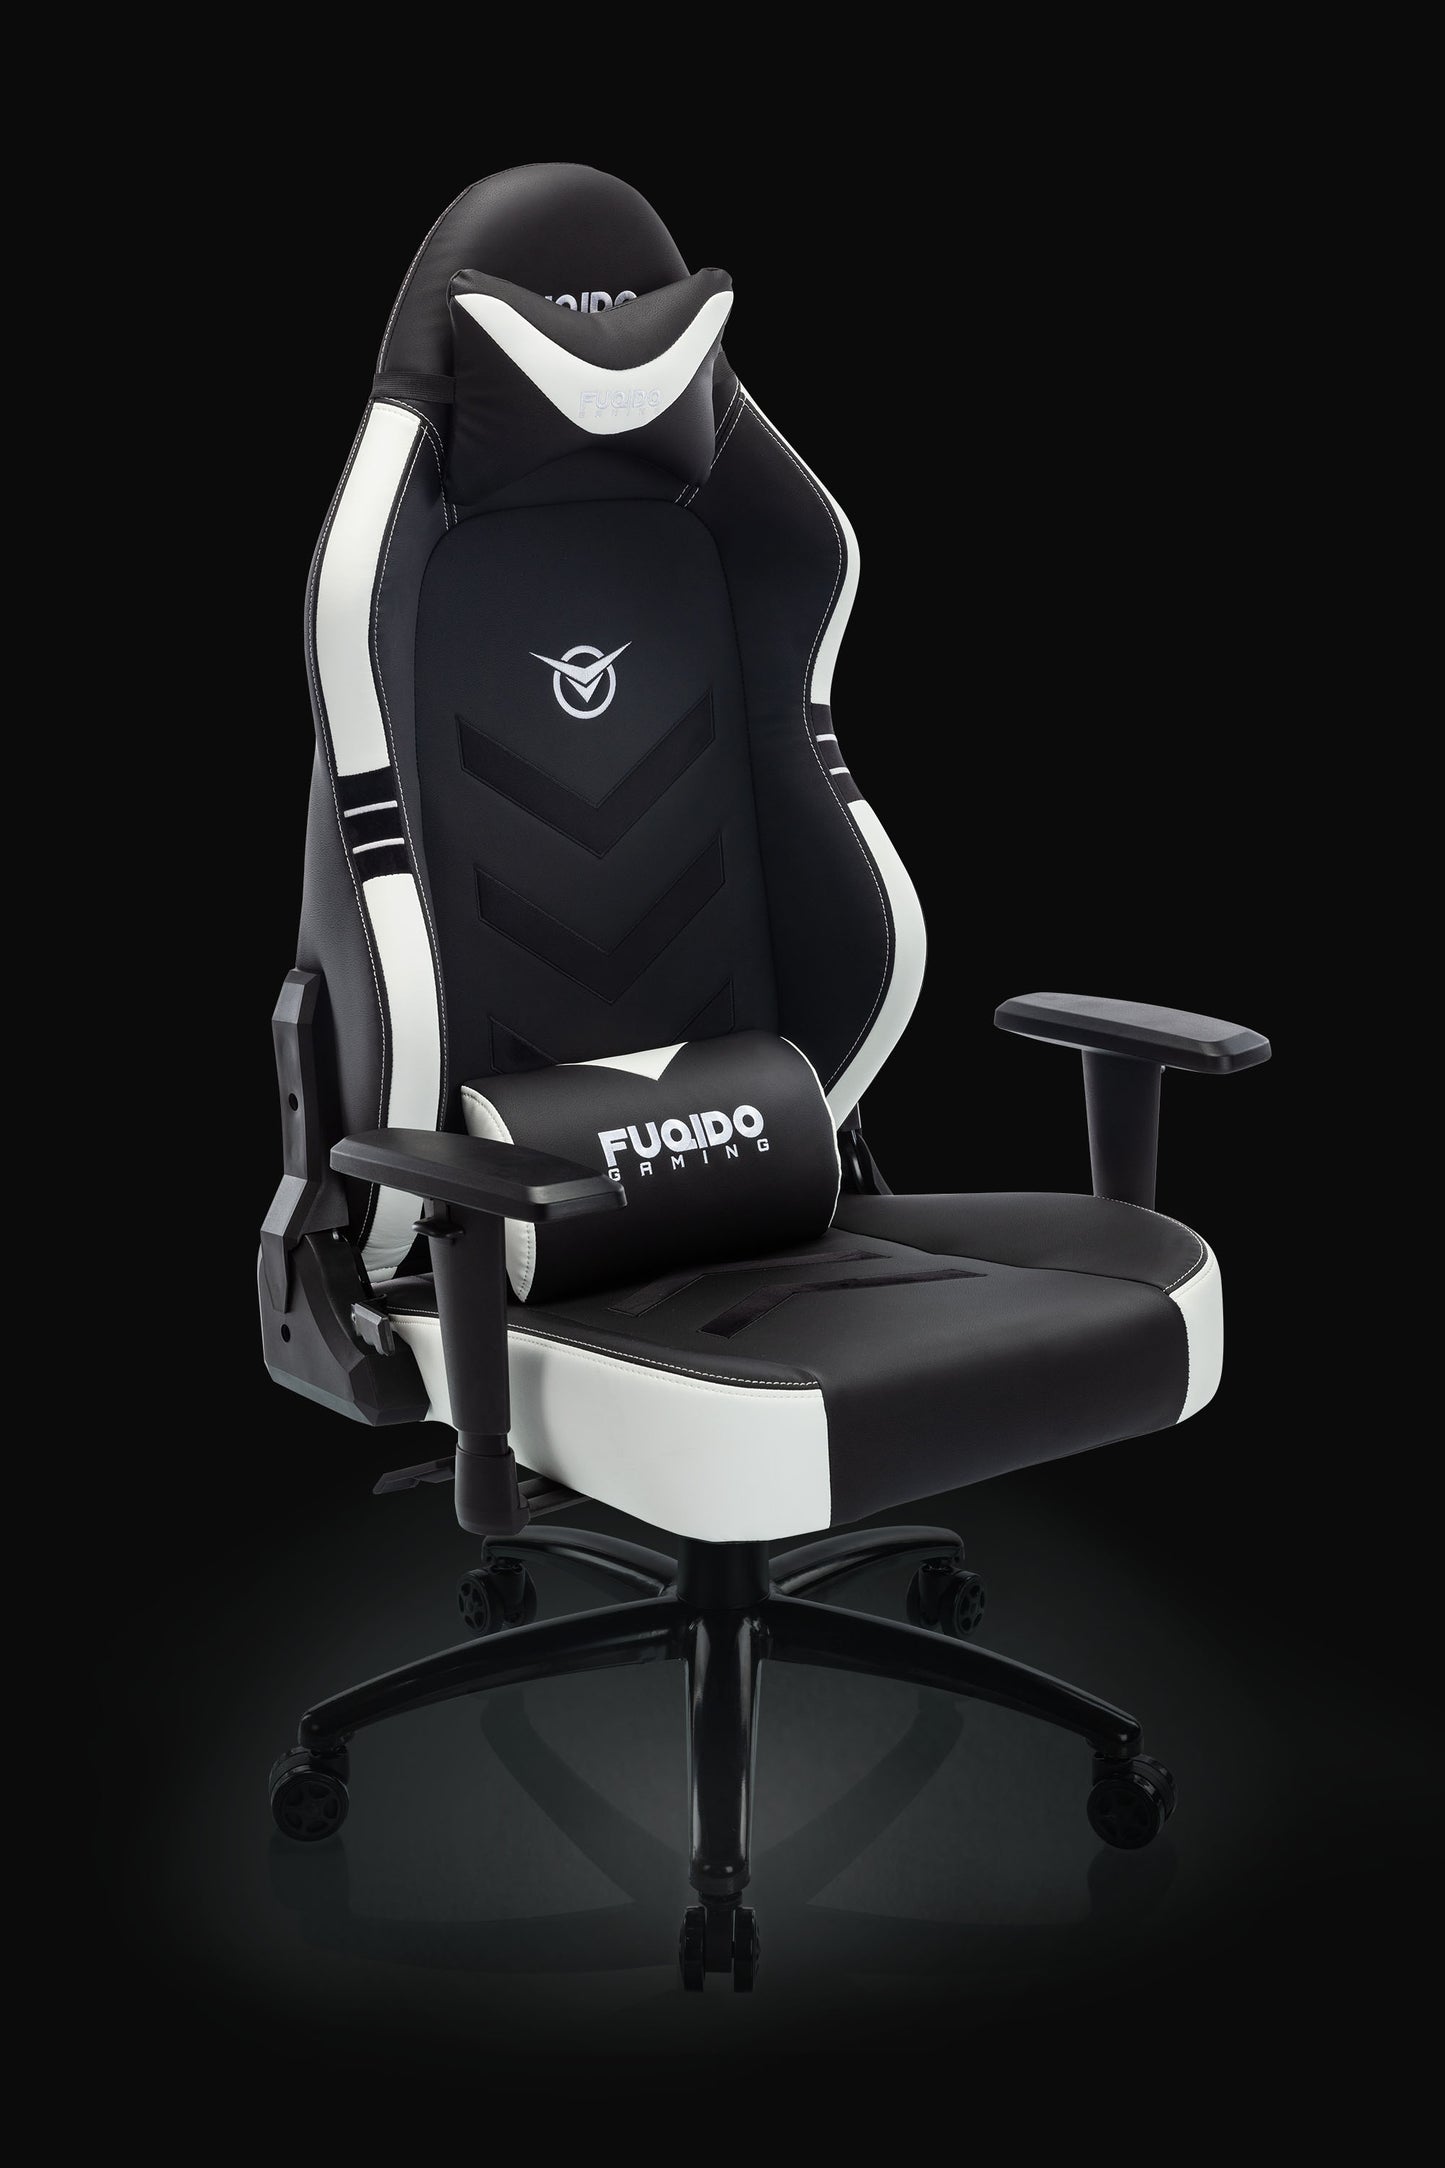 FUQIDO big and tall gaming chair 1325 series black and white#color_white